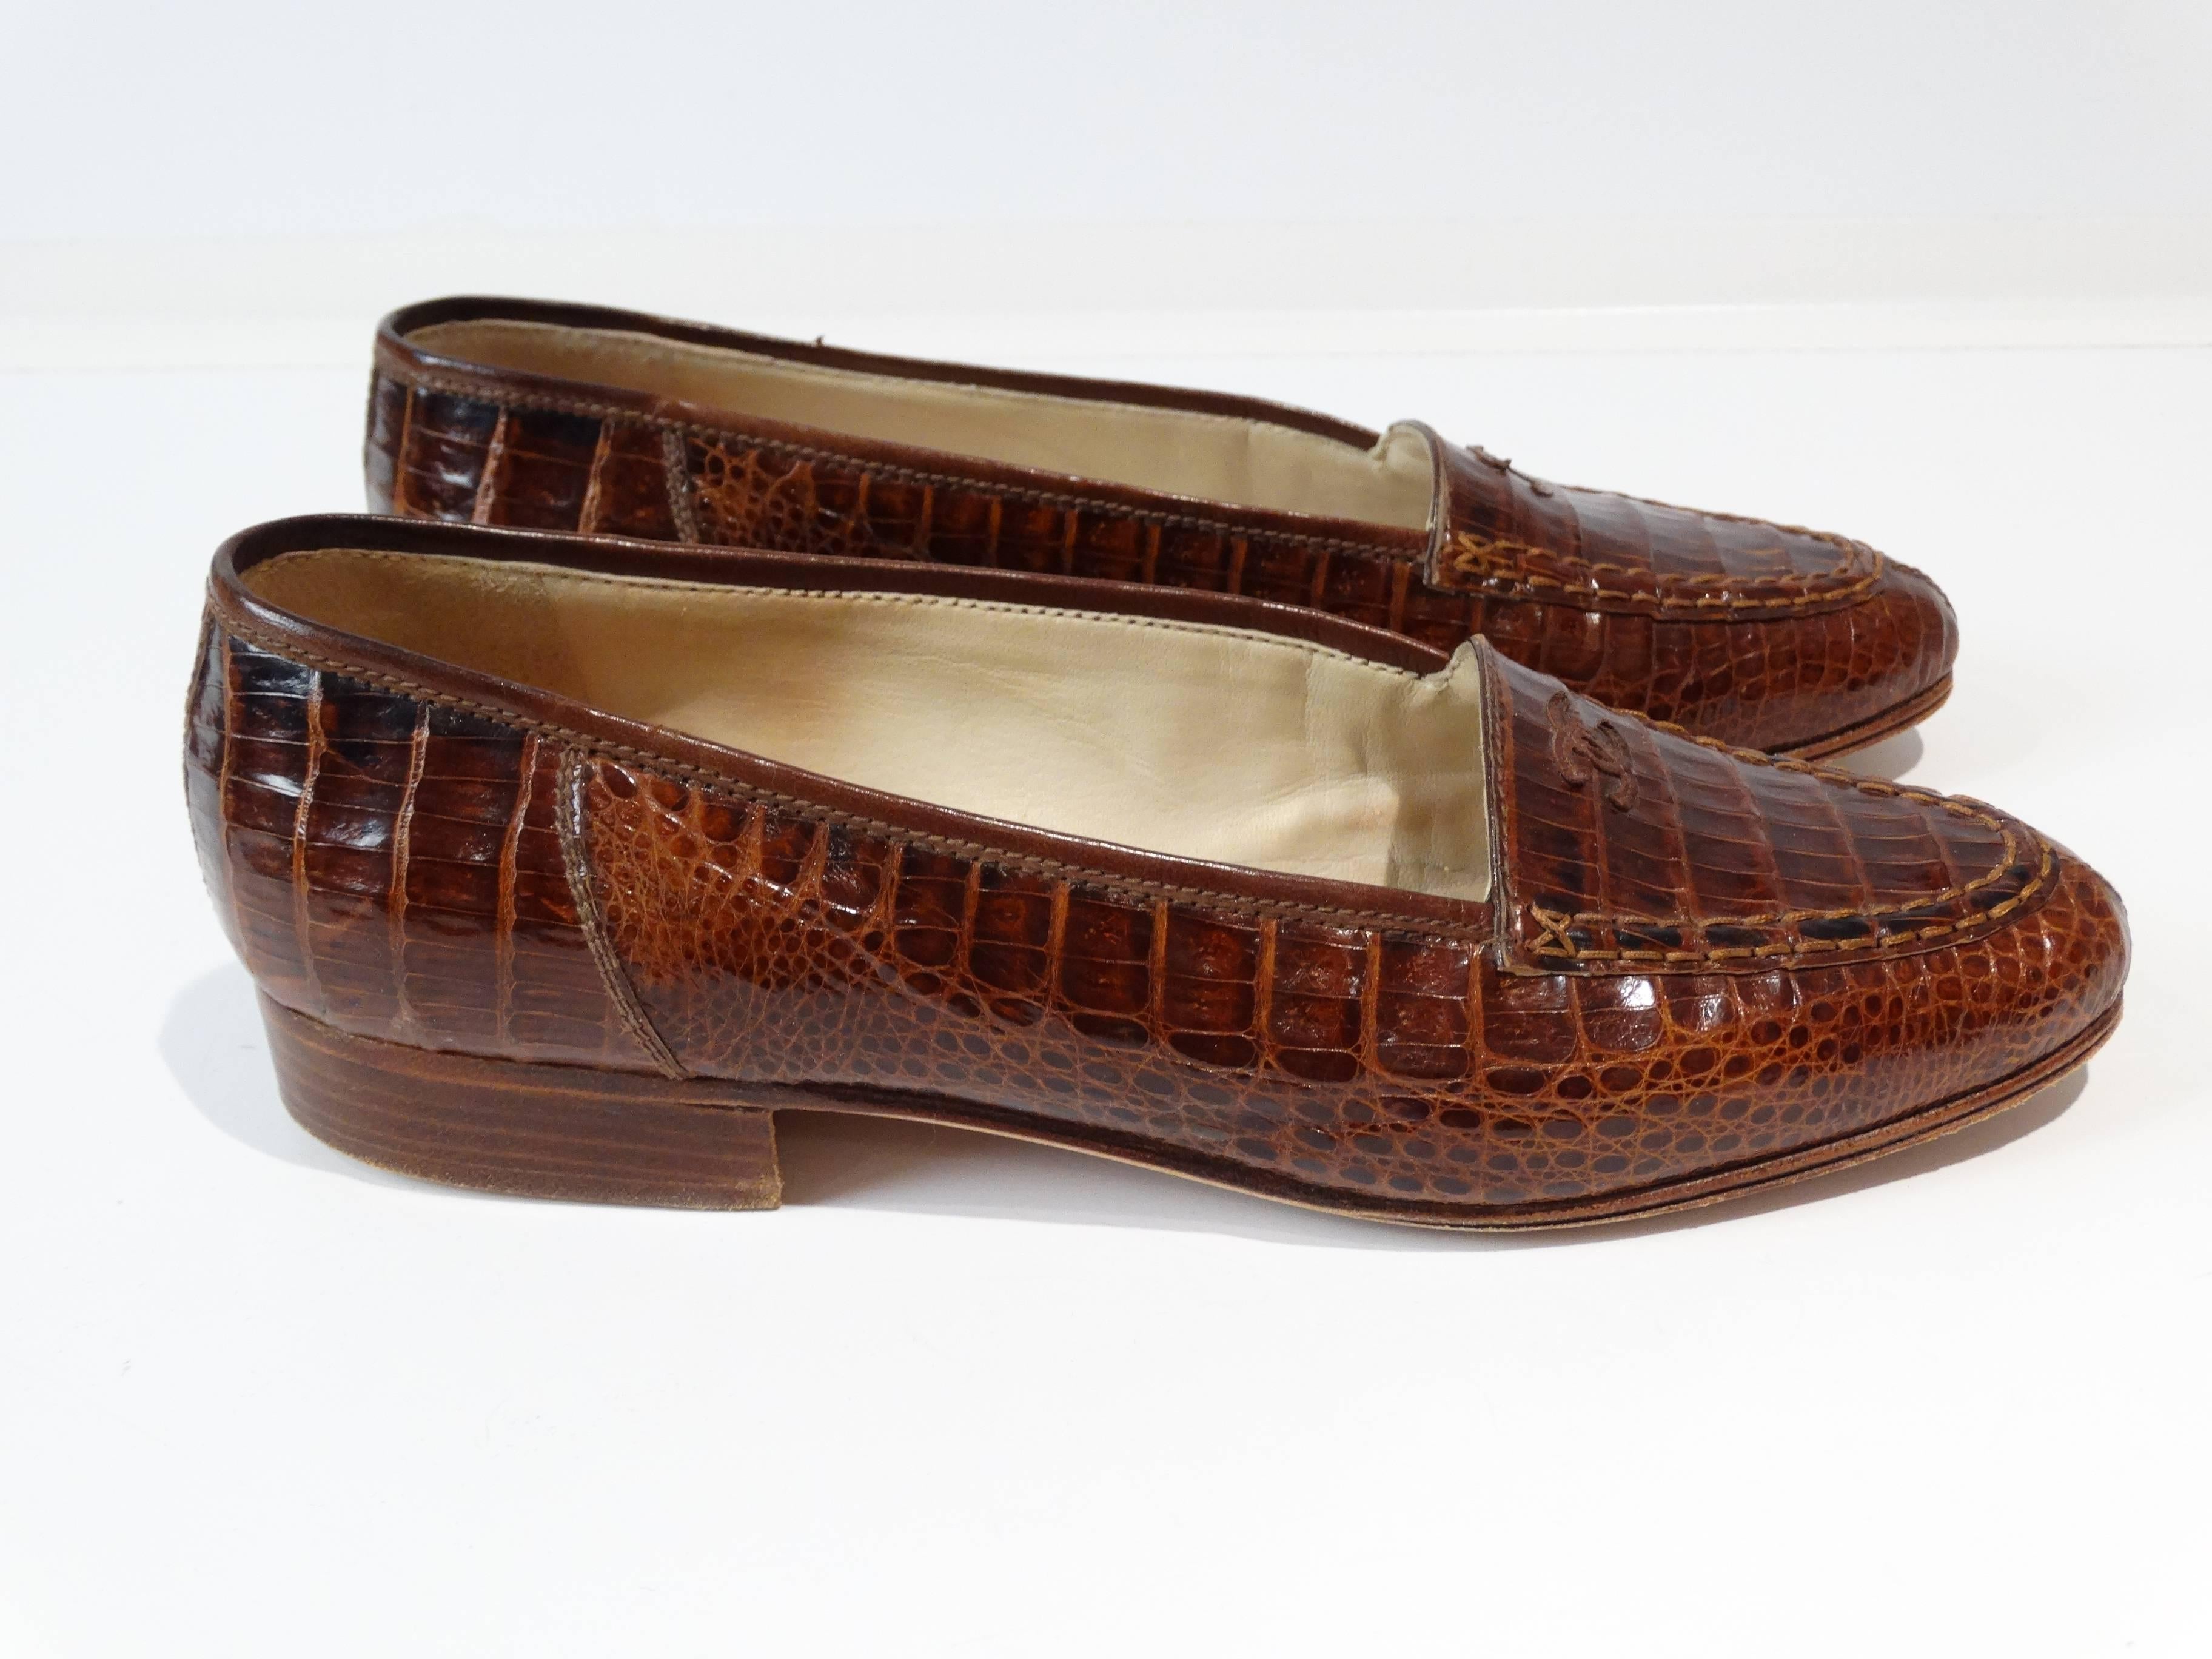 A beautiful pair of 1980s Chanel Crocodile slip on loafers in a deep coniac  color. These lovelies have medium CC on the top front. Very little wear, marked a size 38. Only one previous owner 